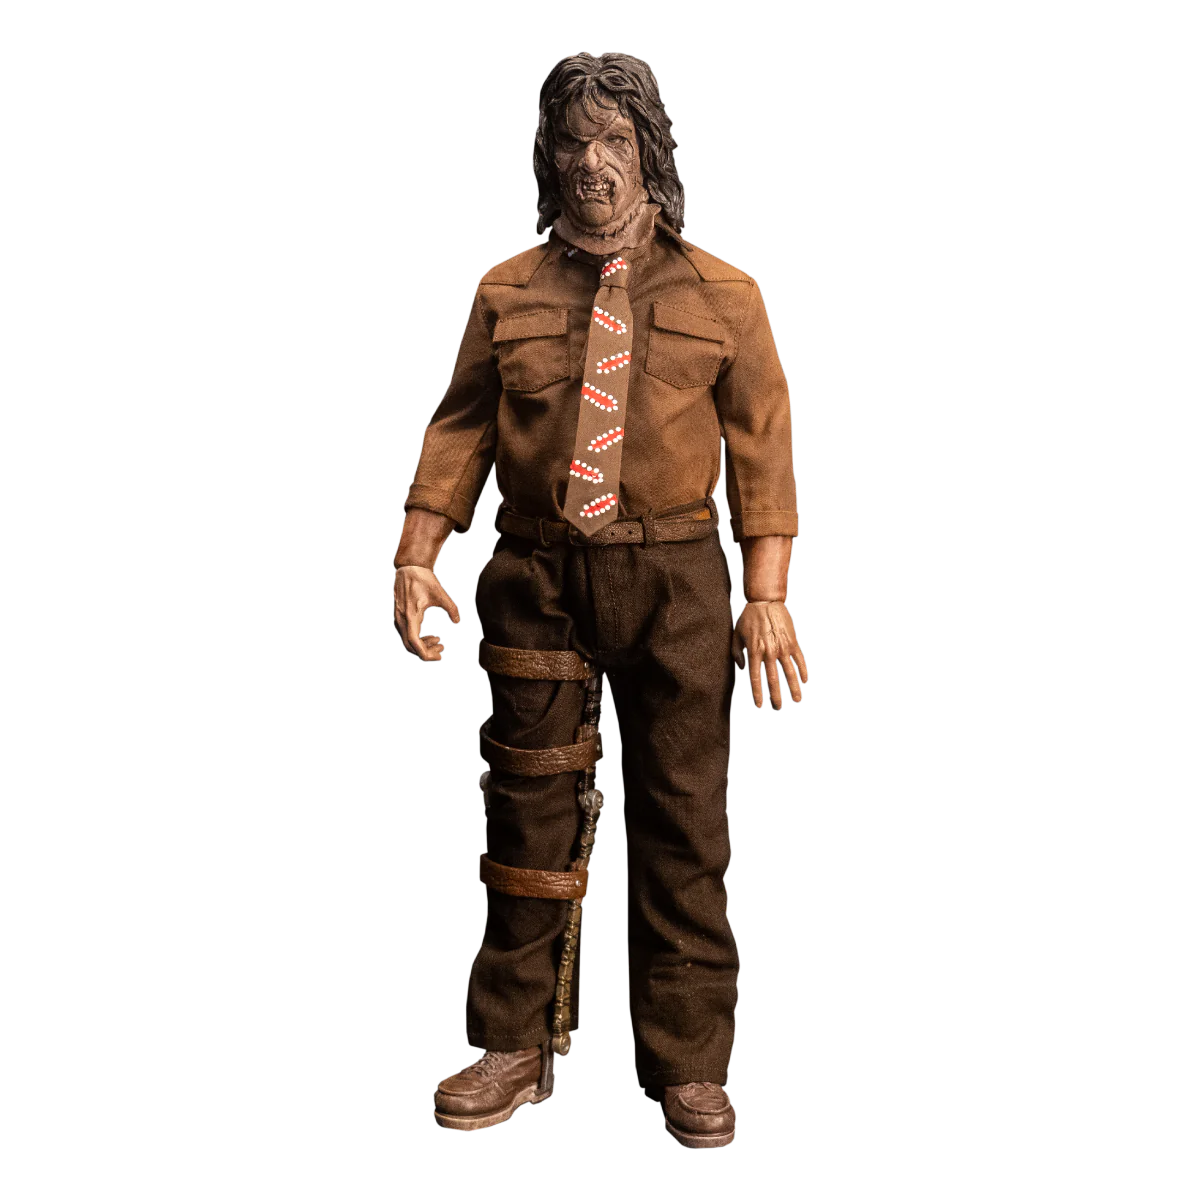 The Texas Chainsaw Massacre III Leatherface 1:6 Scale Action Figure Trick or Treat Studios